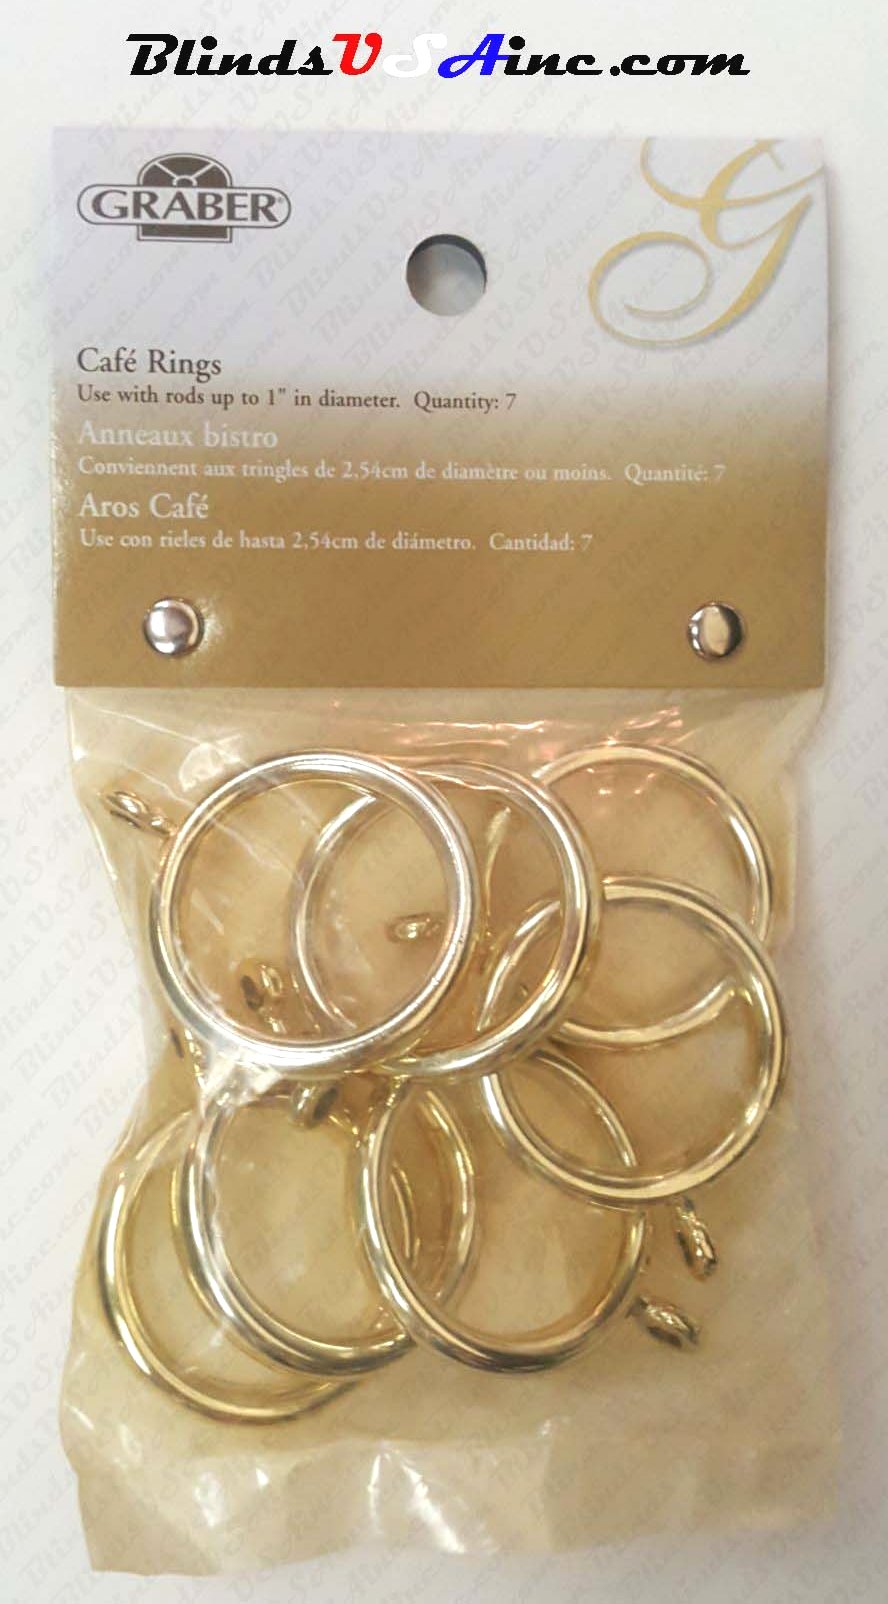 Graber 1" Cafe' Rings with Eyelet, finish brass, pack of 7, Part # 5-820-8